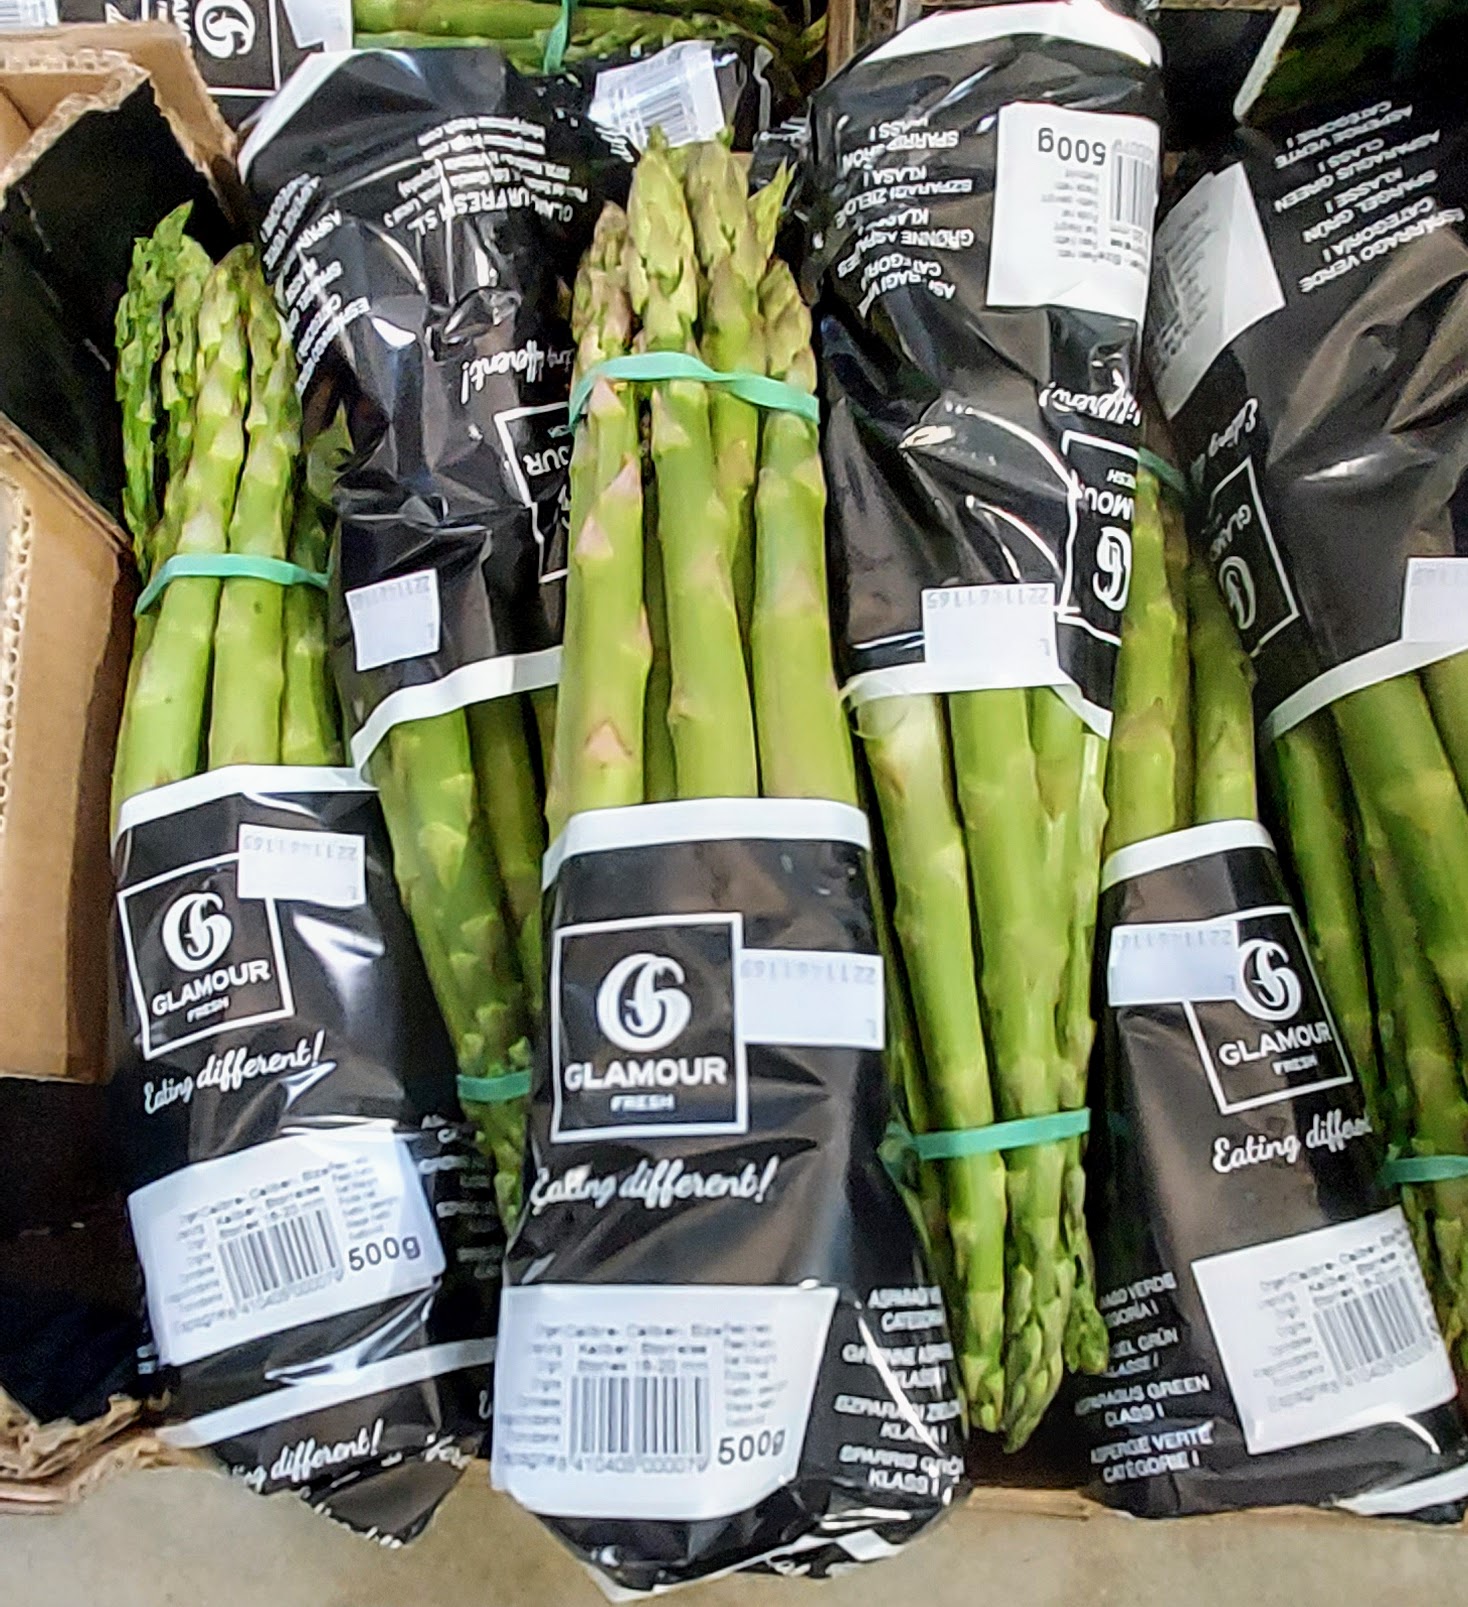 Asparagus bundles in wrappers.